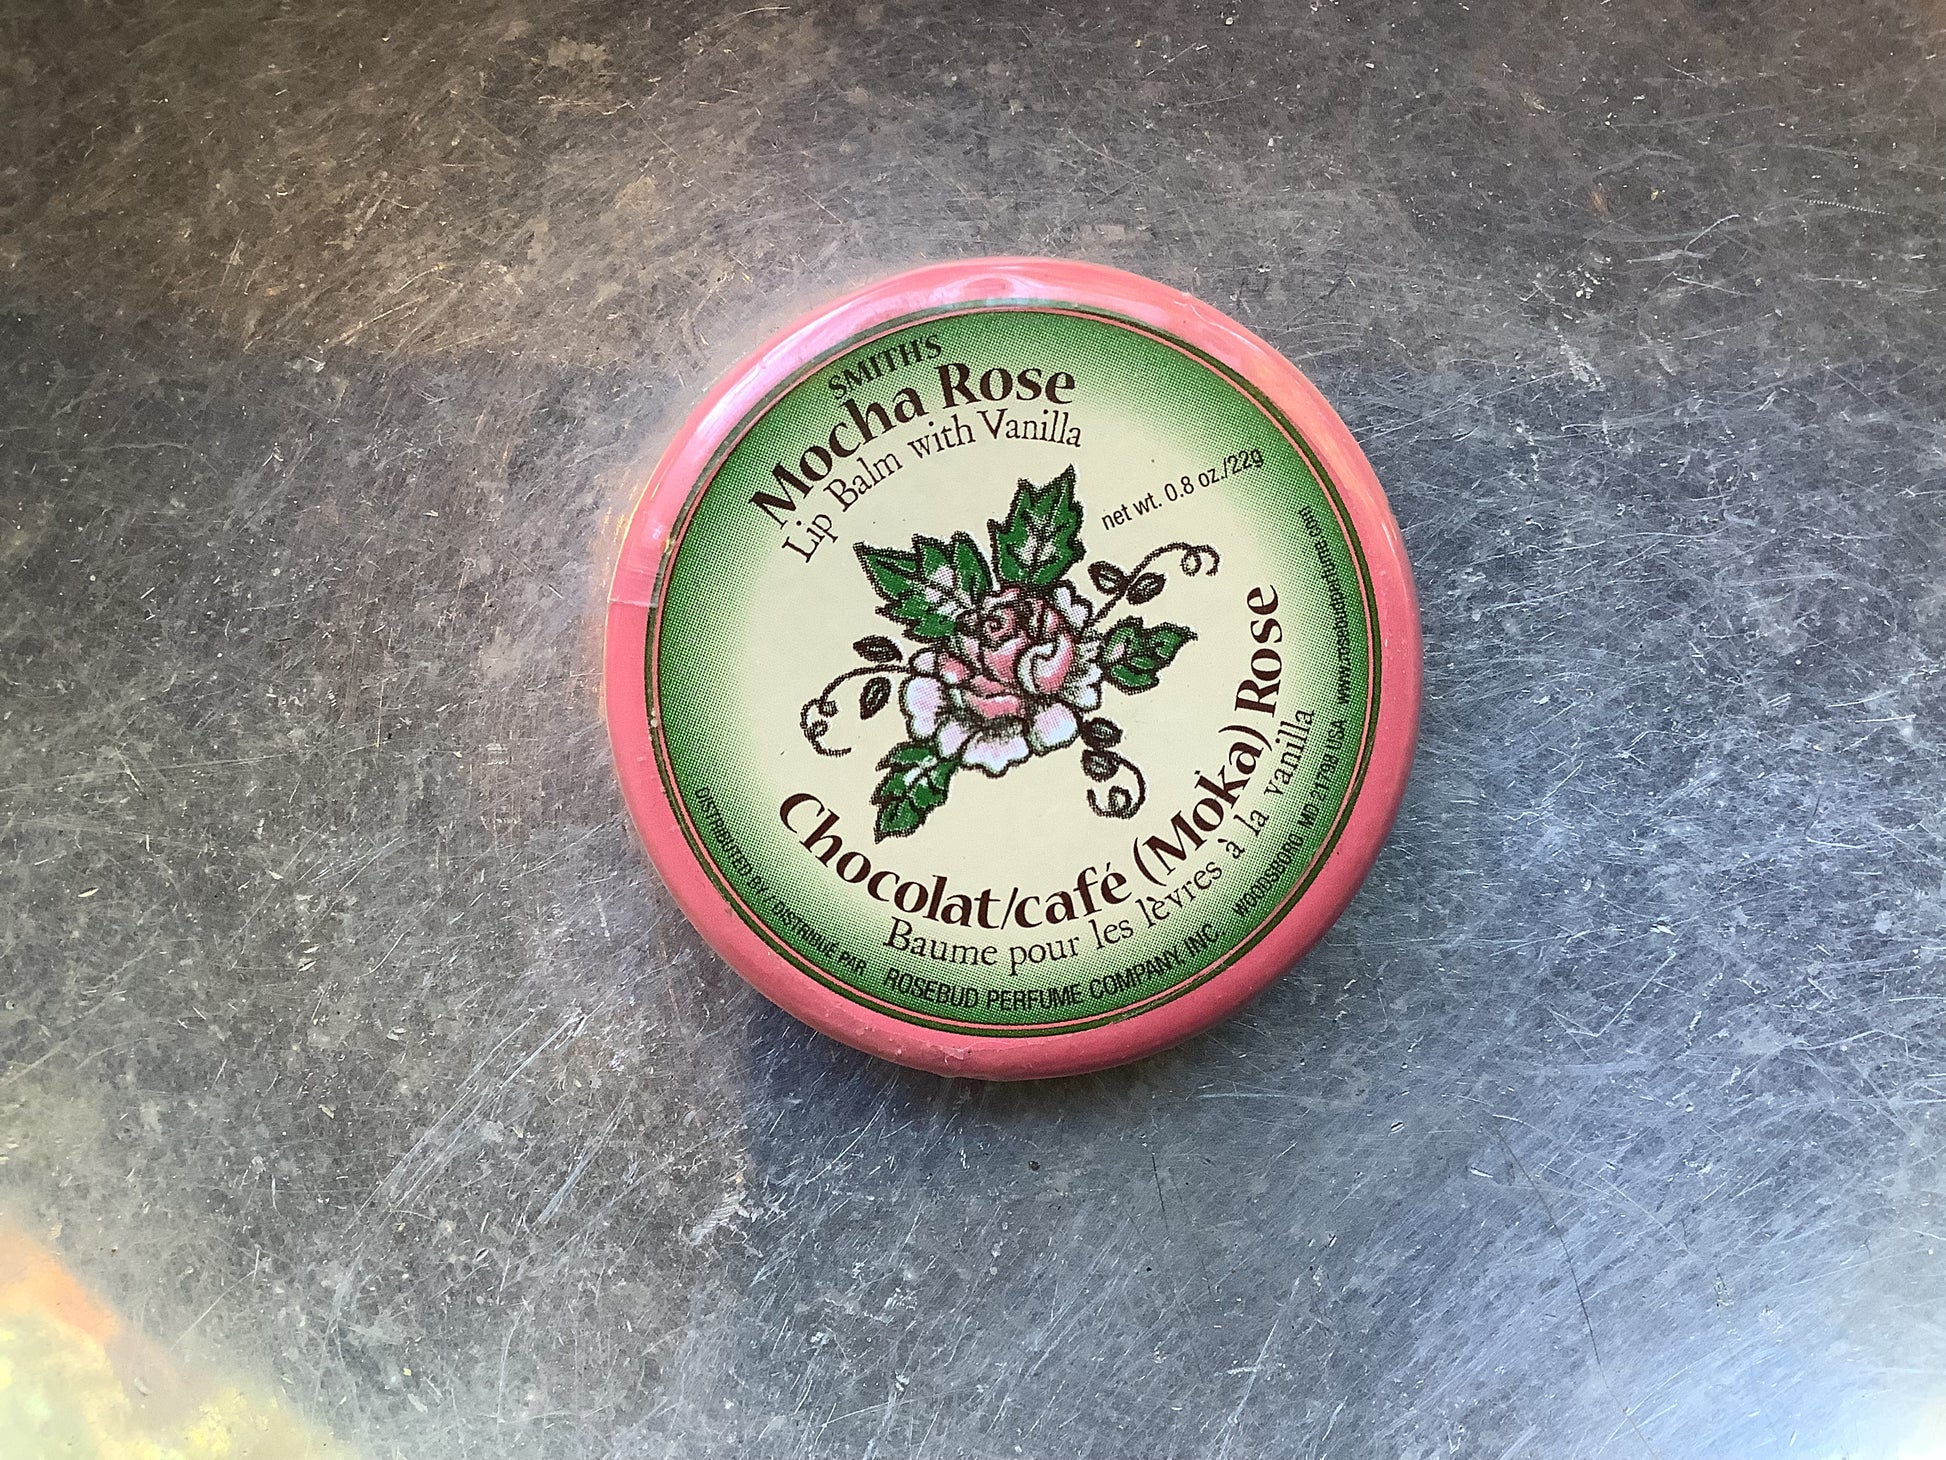 Container of Smith's mocha rose lip balm